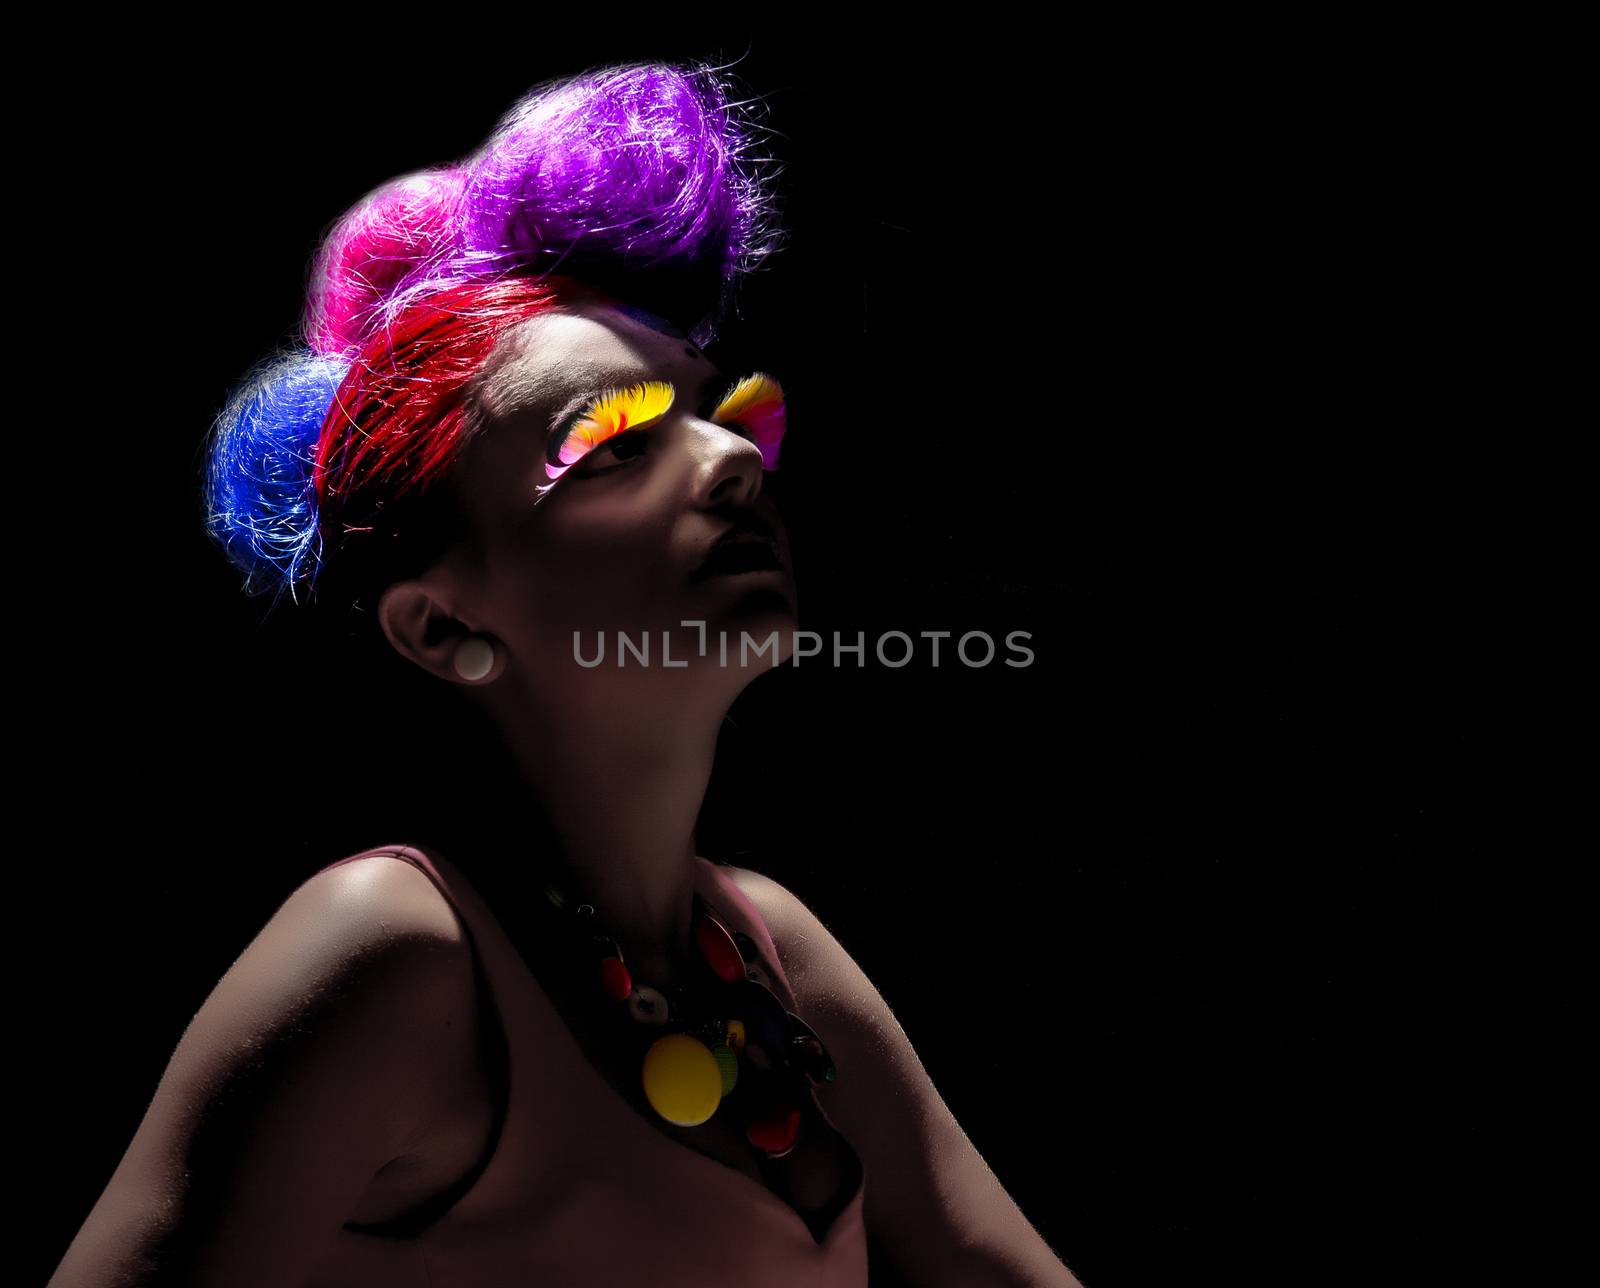 Female model posing with distinctive hairstyle